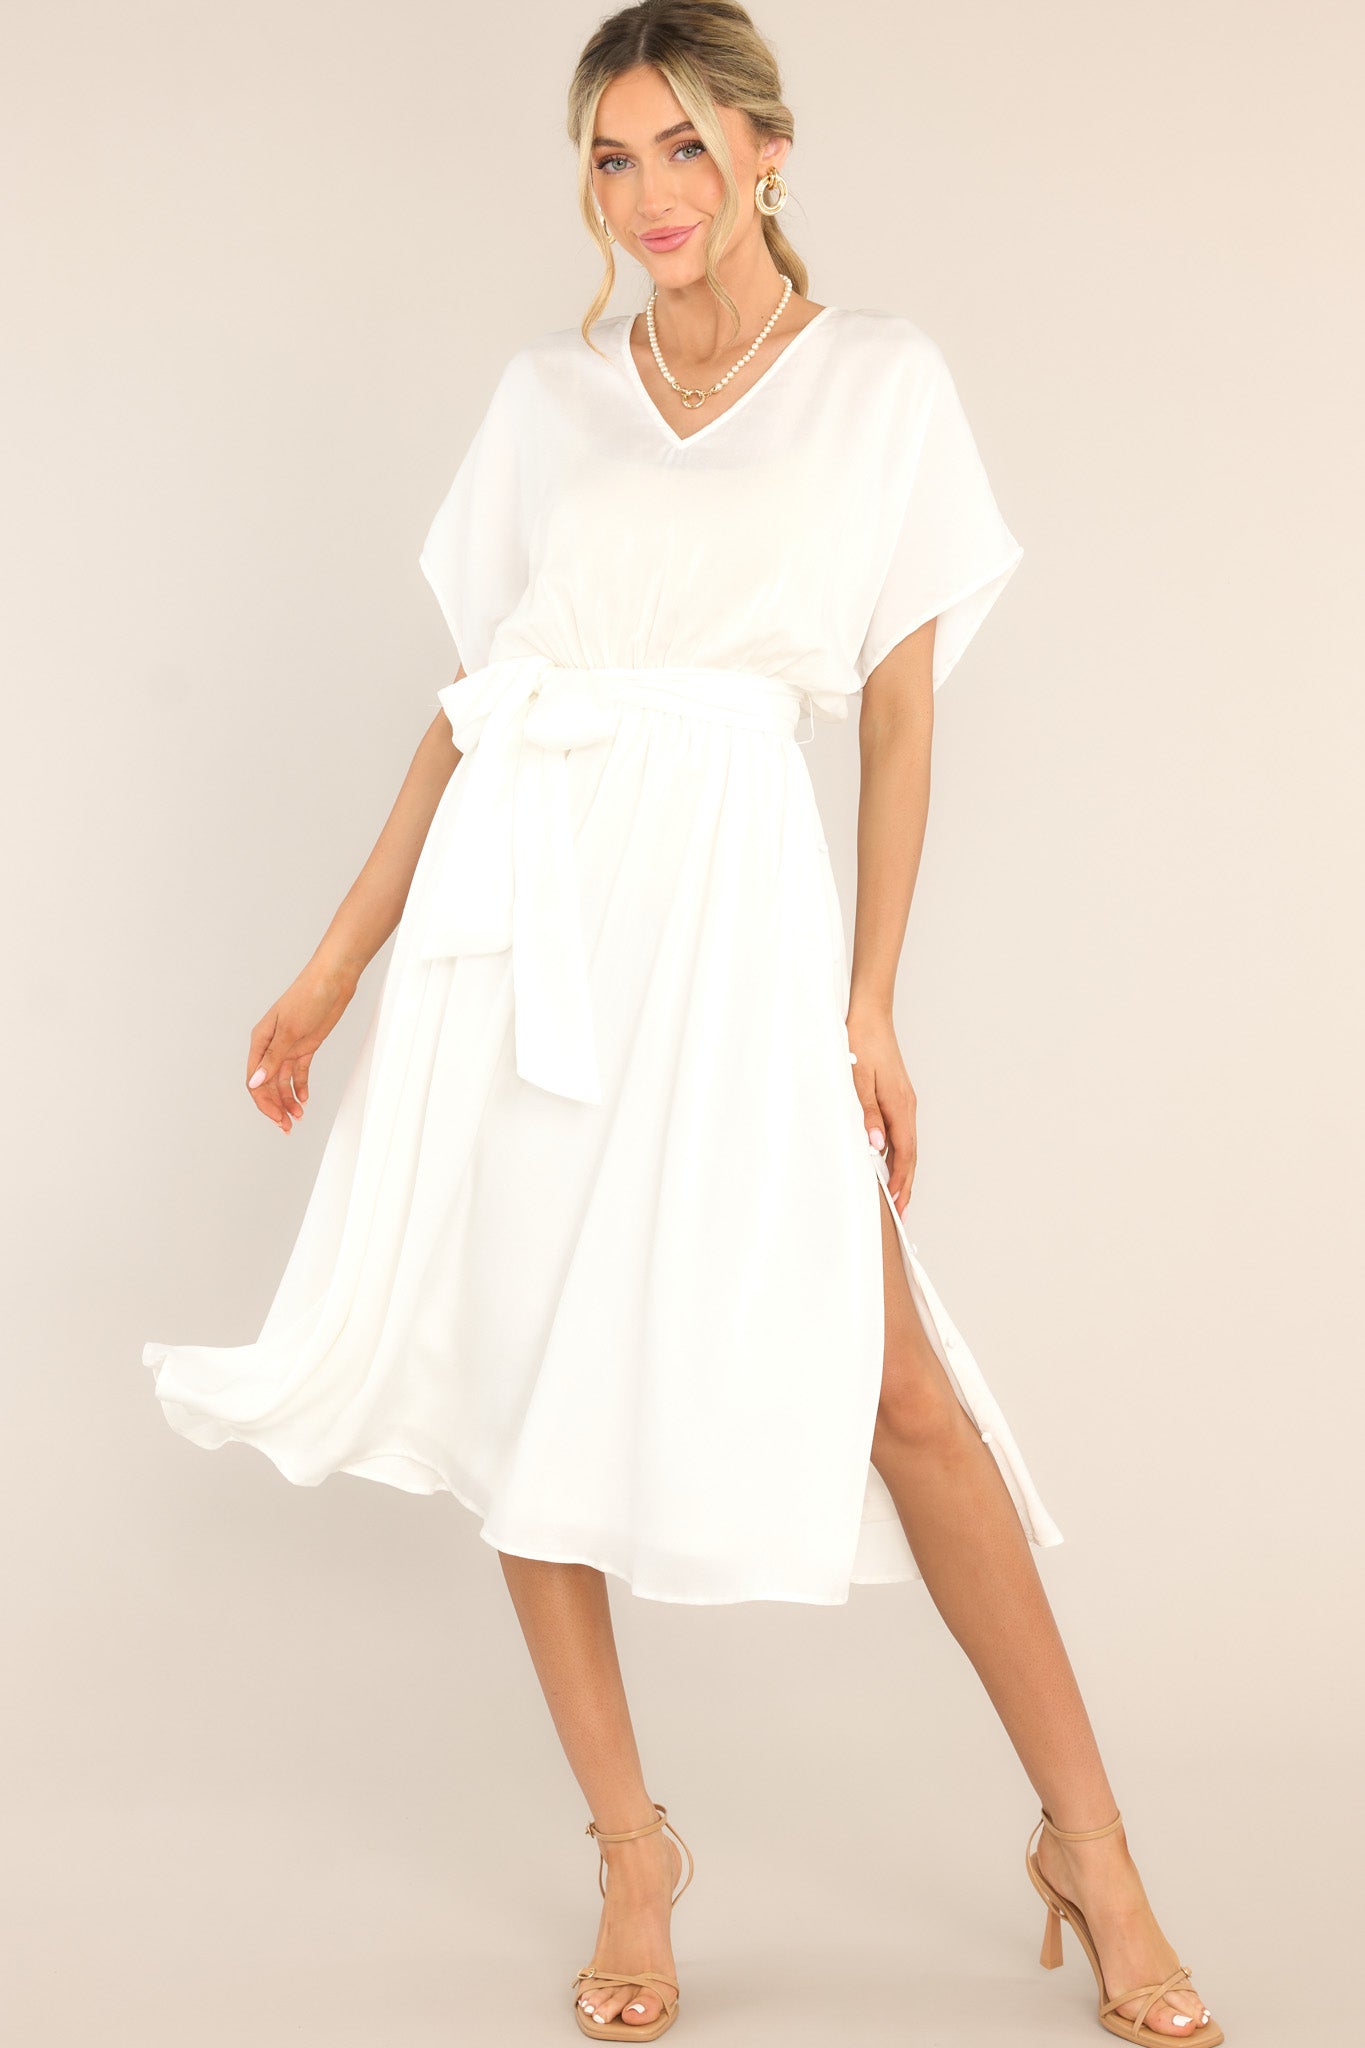 This all white midi dress features a V-neckline, an open back with a self-tie closure, flowy cap sleeves, an elastic waistband with a self-tie fabric belt, and button detailing down the side of the skirt.